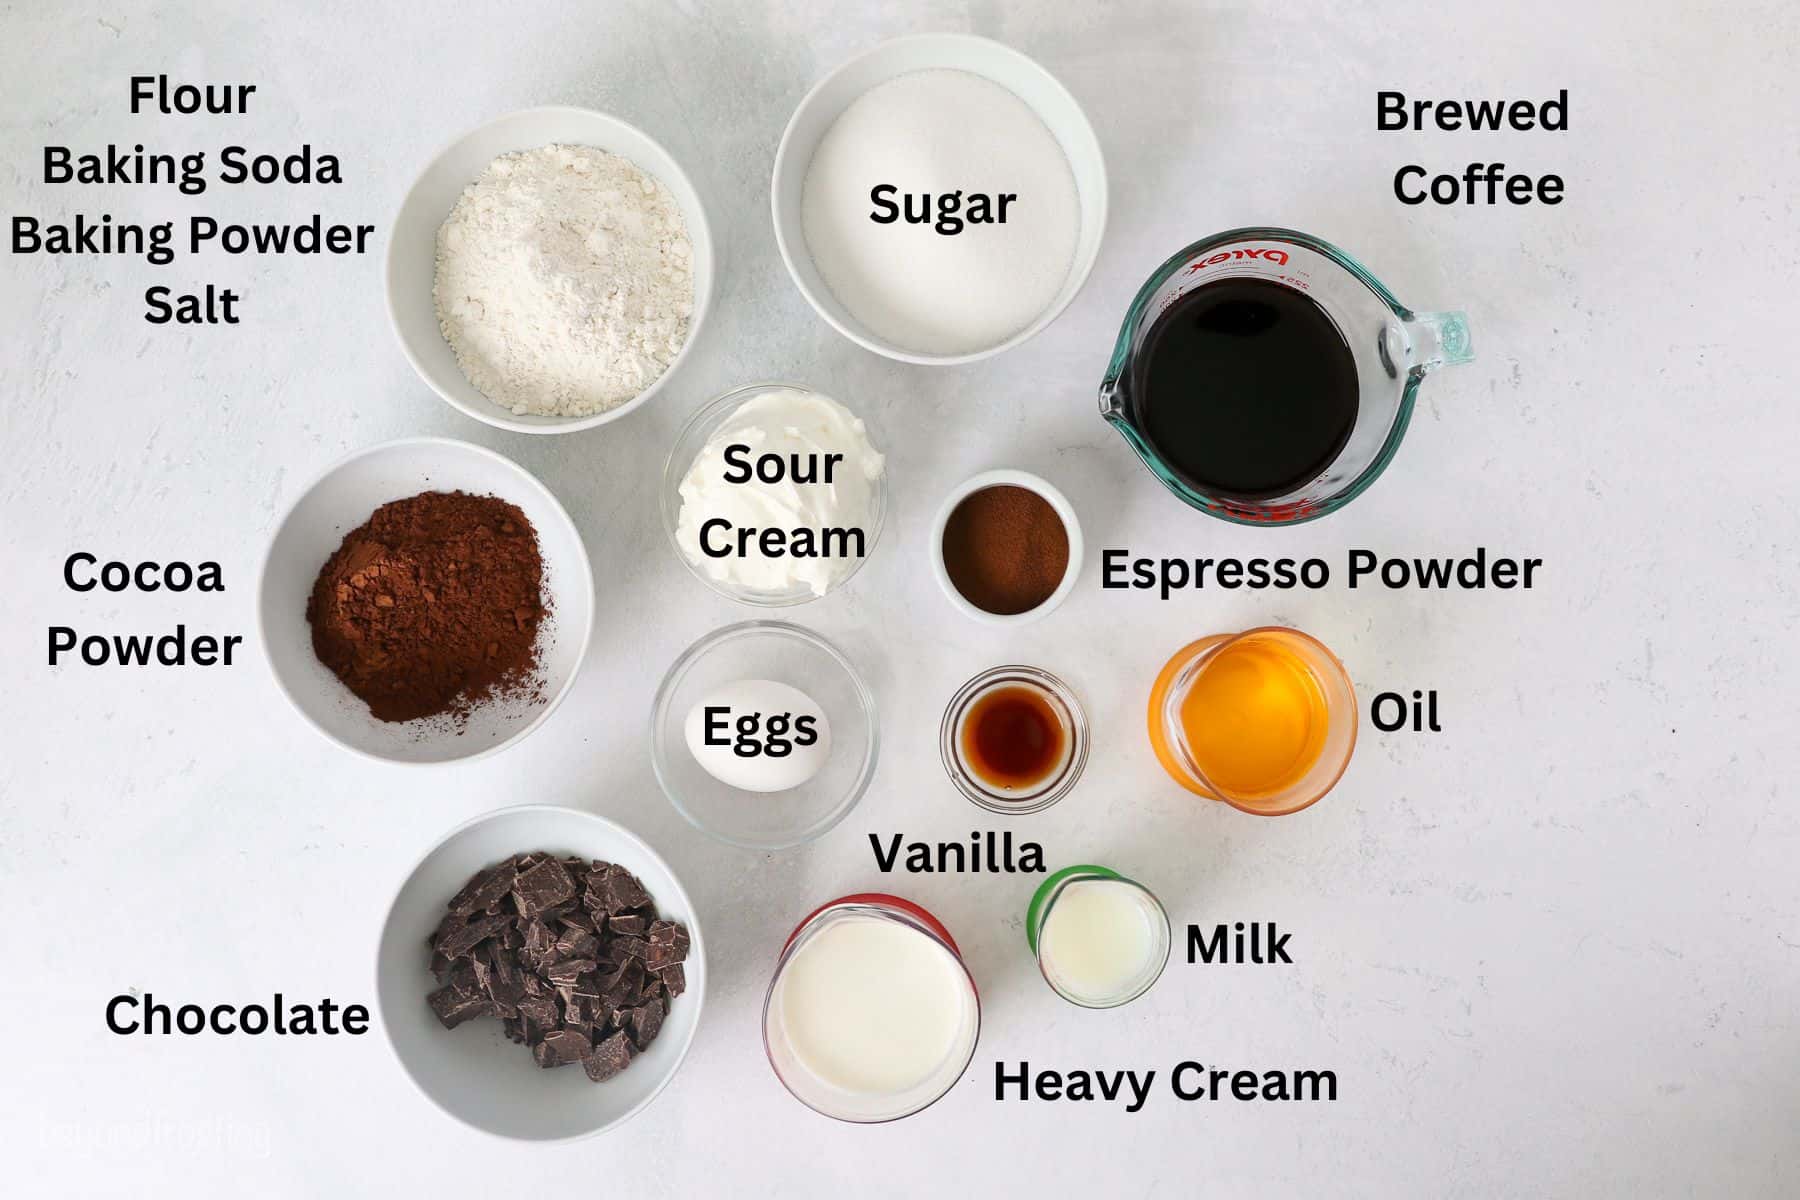 Ingredients for chocolate bundt cake with text labels over each ingredient.